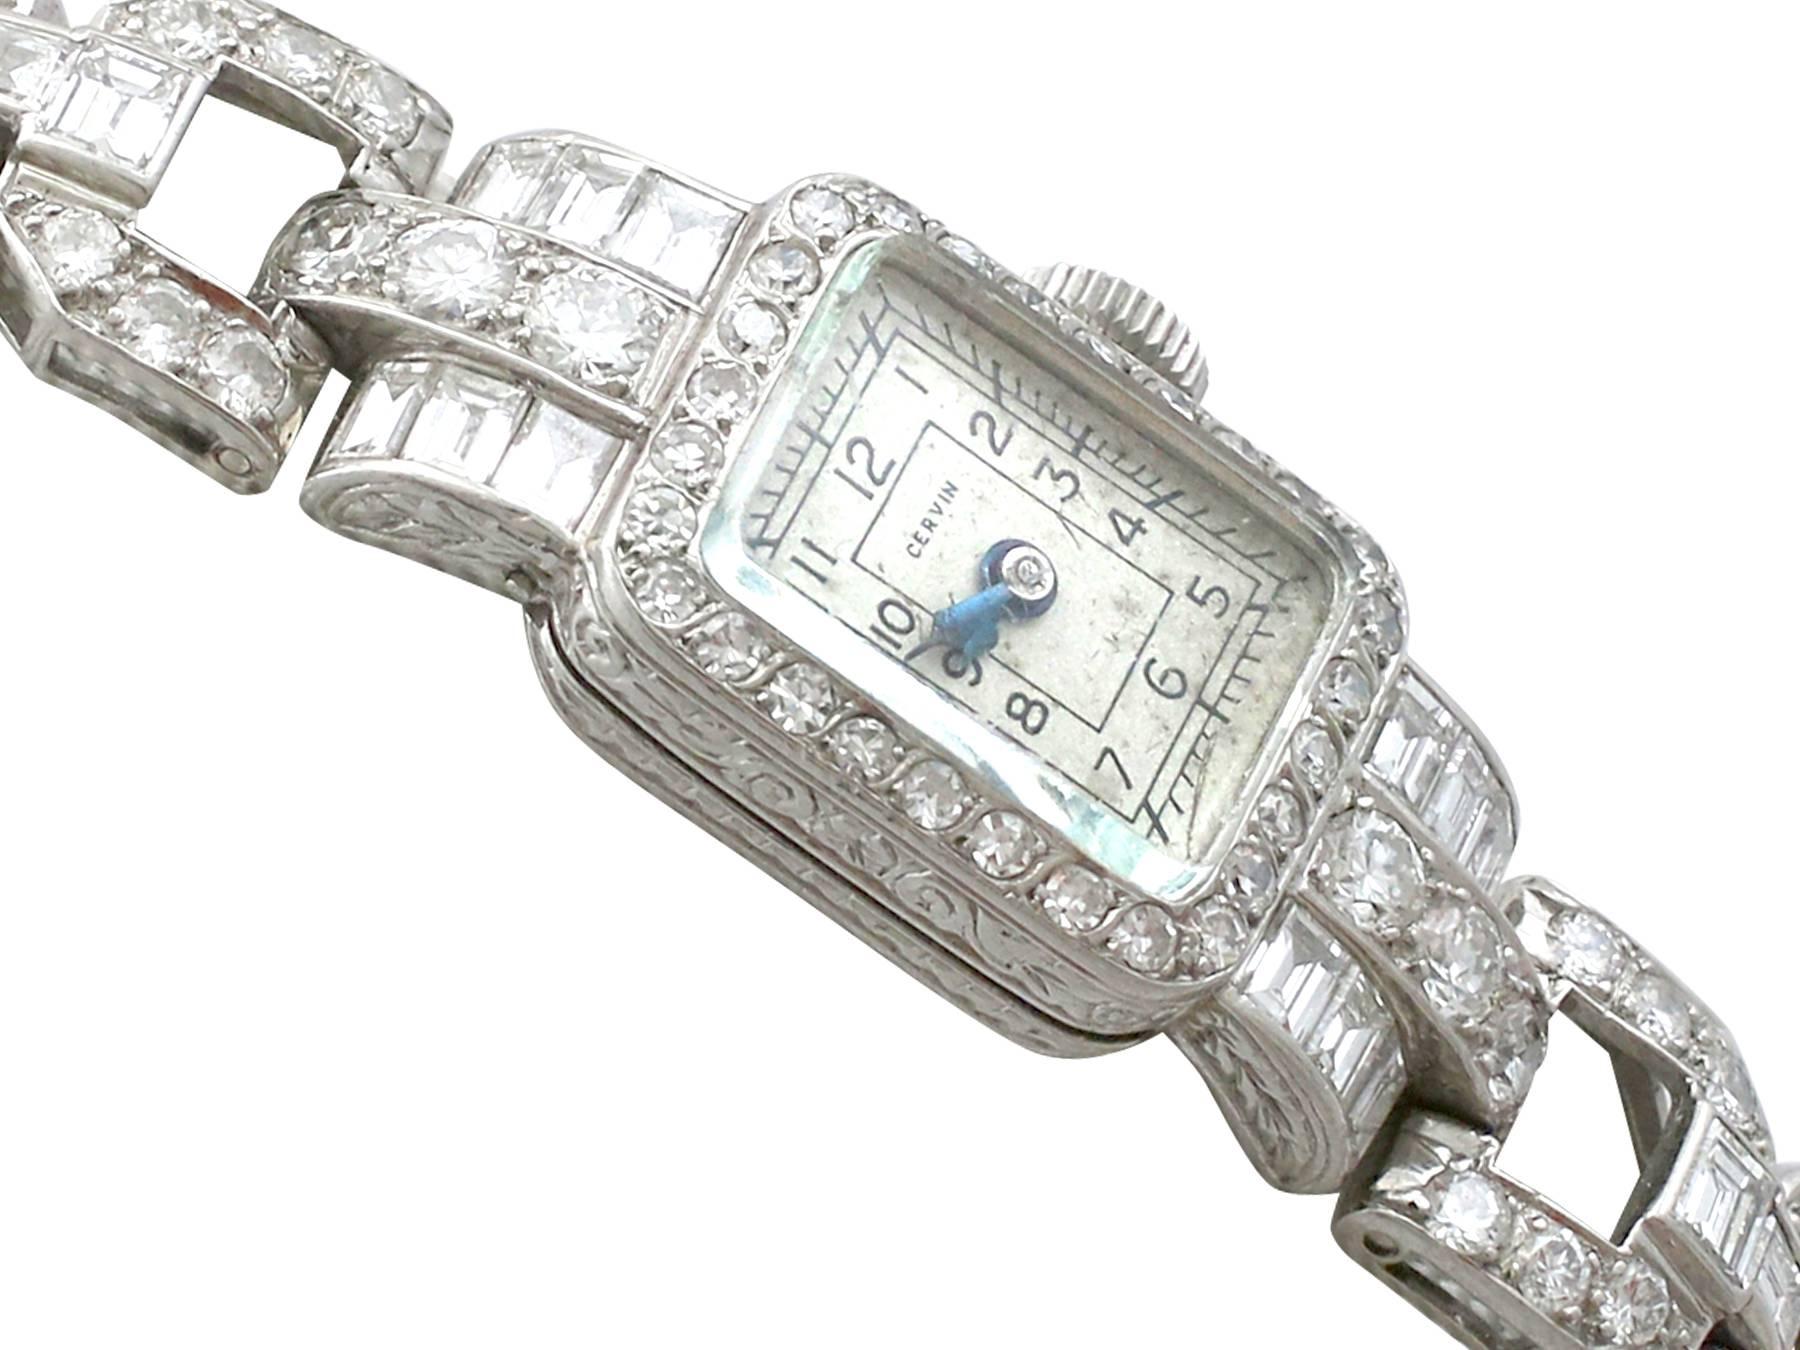 A fine and stunning vintage diamond cocktail watch in platinum, with 3.35 carat (total) diamonds; part of our diverse vintage watch and diamond jewelry collections

This stunning ladies' diamond cocktail watch made by Cervin has been crafted in